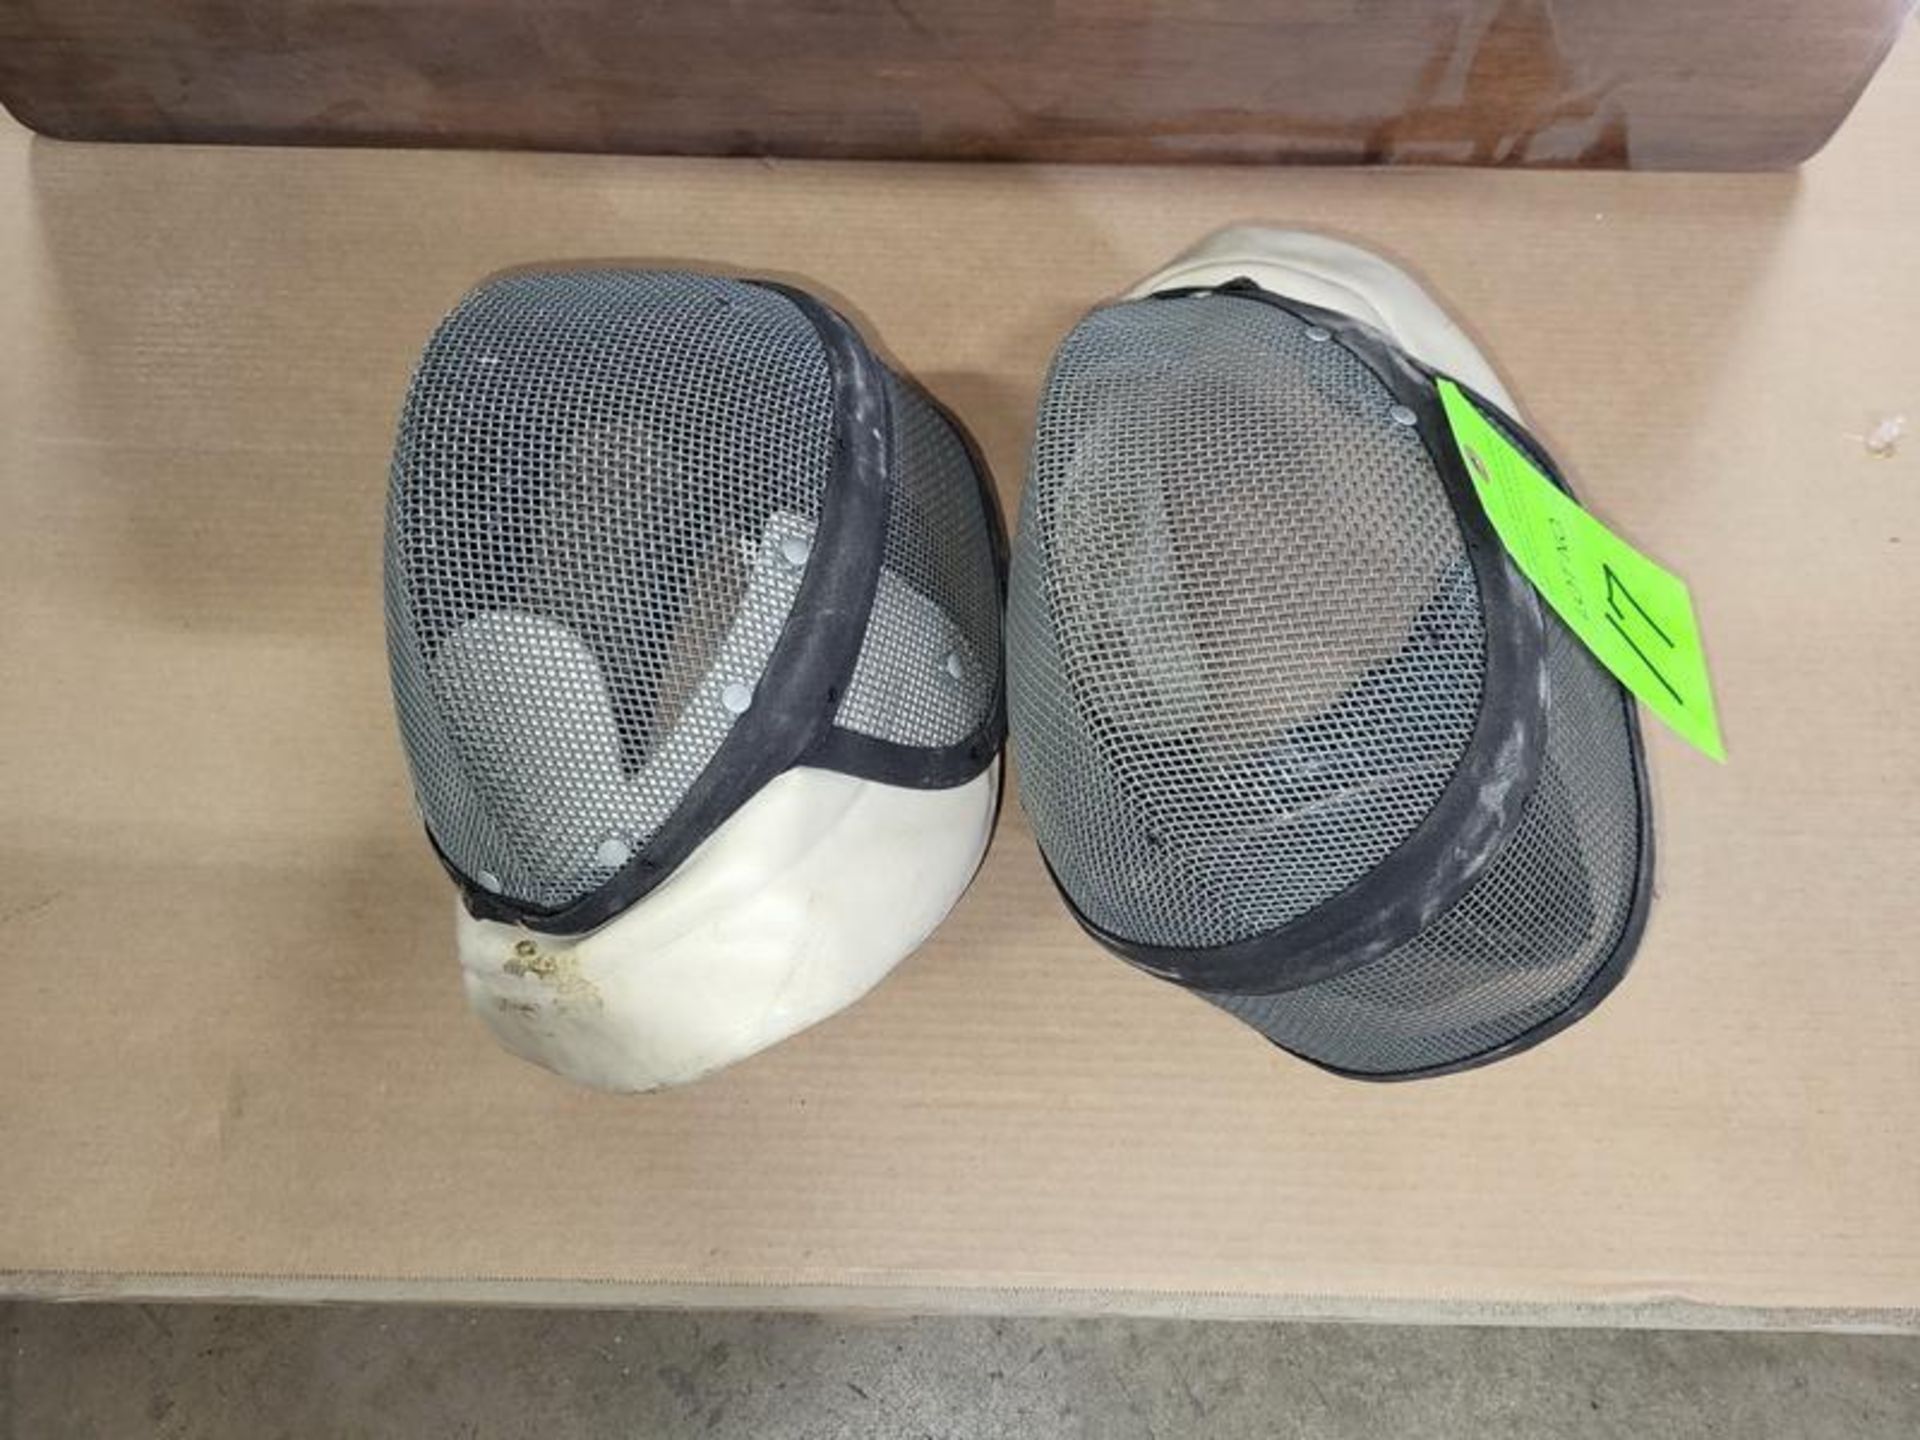 Lot of (2) Fencing Safety Helmets, Medium Size - Image 2 of 2